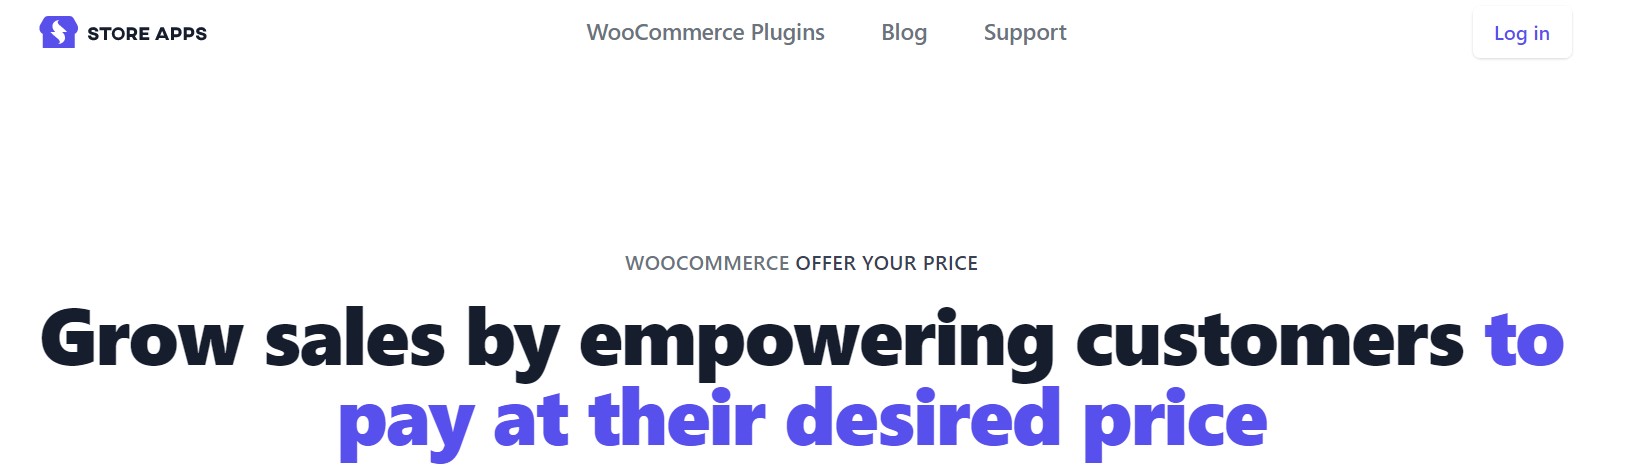 Offer Your Price for WooCommerce